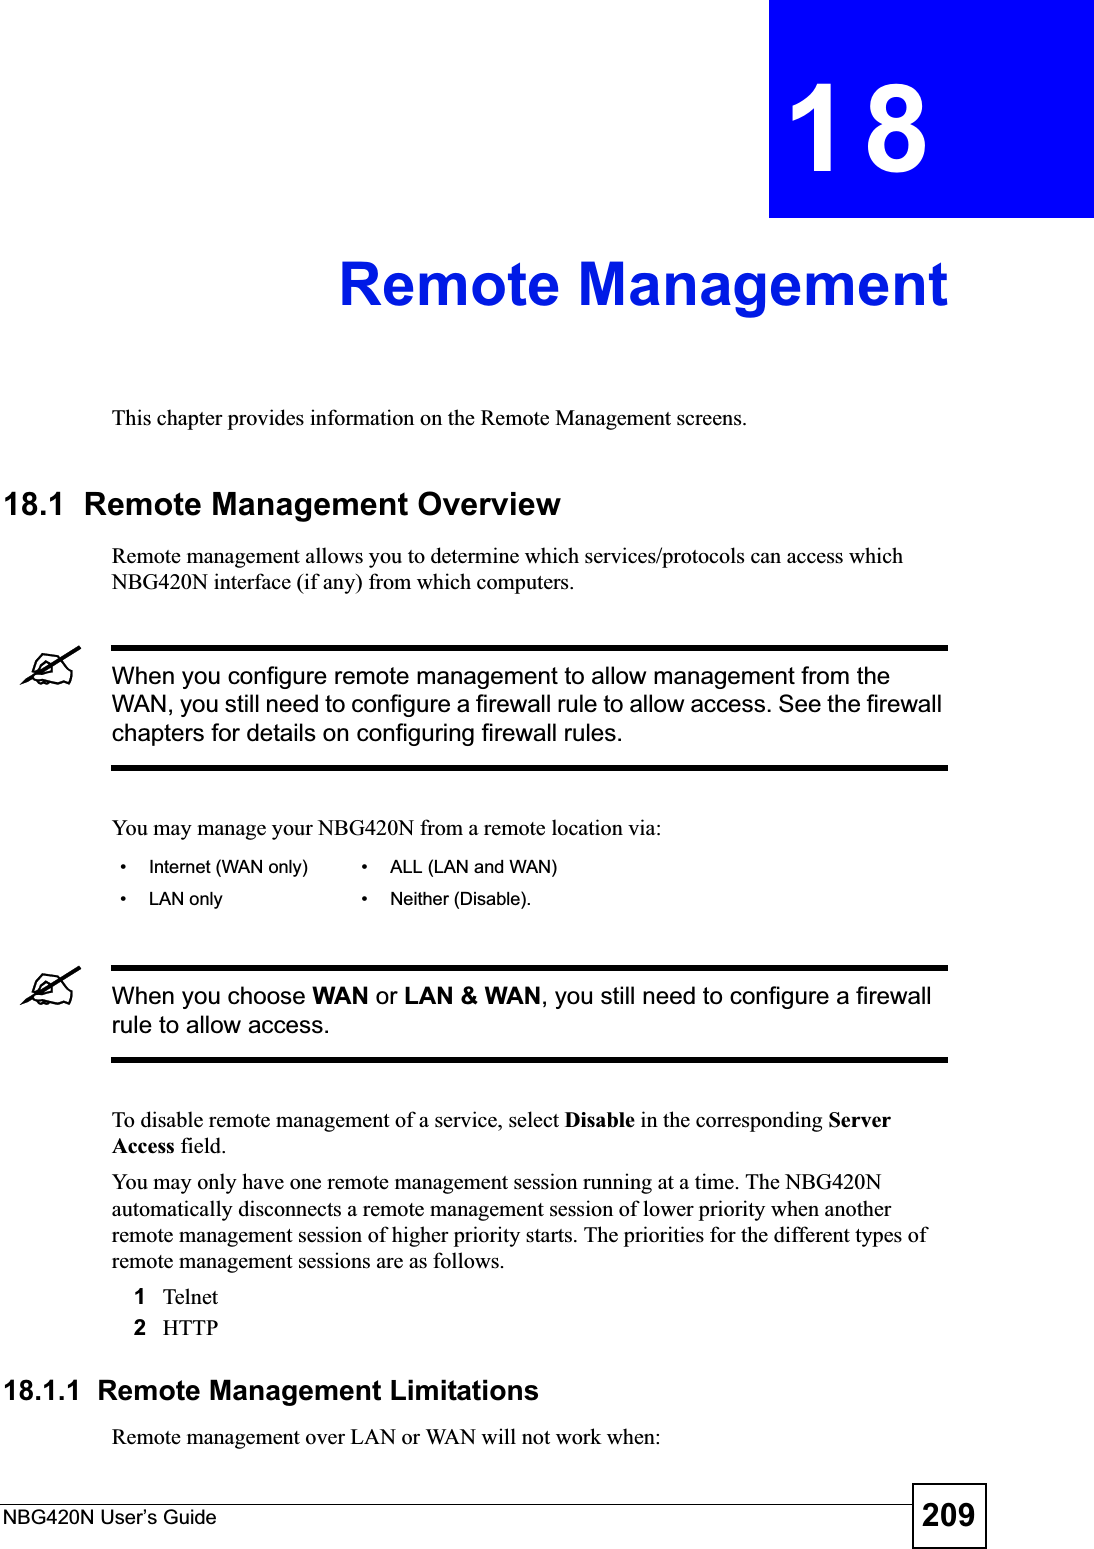 NBG420N User’s Guide 209CHAPTER 18Remote ManagementThis chapter provides information on the Remote Management screens. 18.1  Remote Management OverviewRemote management allows you to determine which services/protocols can access which NBG420N interface (if any) from which computers.&quot;When you configure remote management to allow management from the WAN, you still need to configure a firewall rule to allow access. See the firewall chapters for details on configuring firewall rules.You may manage your NBG420N from a remote location via:&quot;When you choose WAN or LAN &amp; WAN, you still need to configure a firewall rule to allow access.To disable remote management of a service, select Disable in the corresponding Server Access field.You may only have one remote management session running at a time. The NBG420N automatically disconnects a remote management session of lower priority when another remote management session of higher priority starts. The priorities for the different types of remote management sessions are as follows.1Telnet2HTTP18.1.1  Remote Management LimitationsRemote management over LAN or WAN will not work when:• Internet (WAN only) • ALL (LAN and WAN)• LAN only • Neither (Disable).